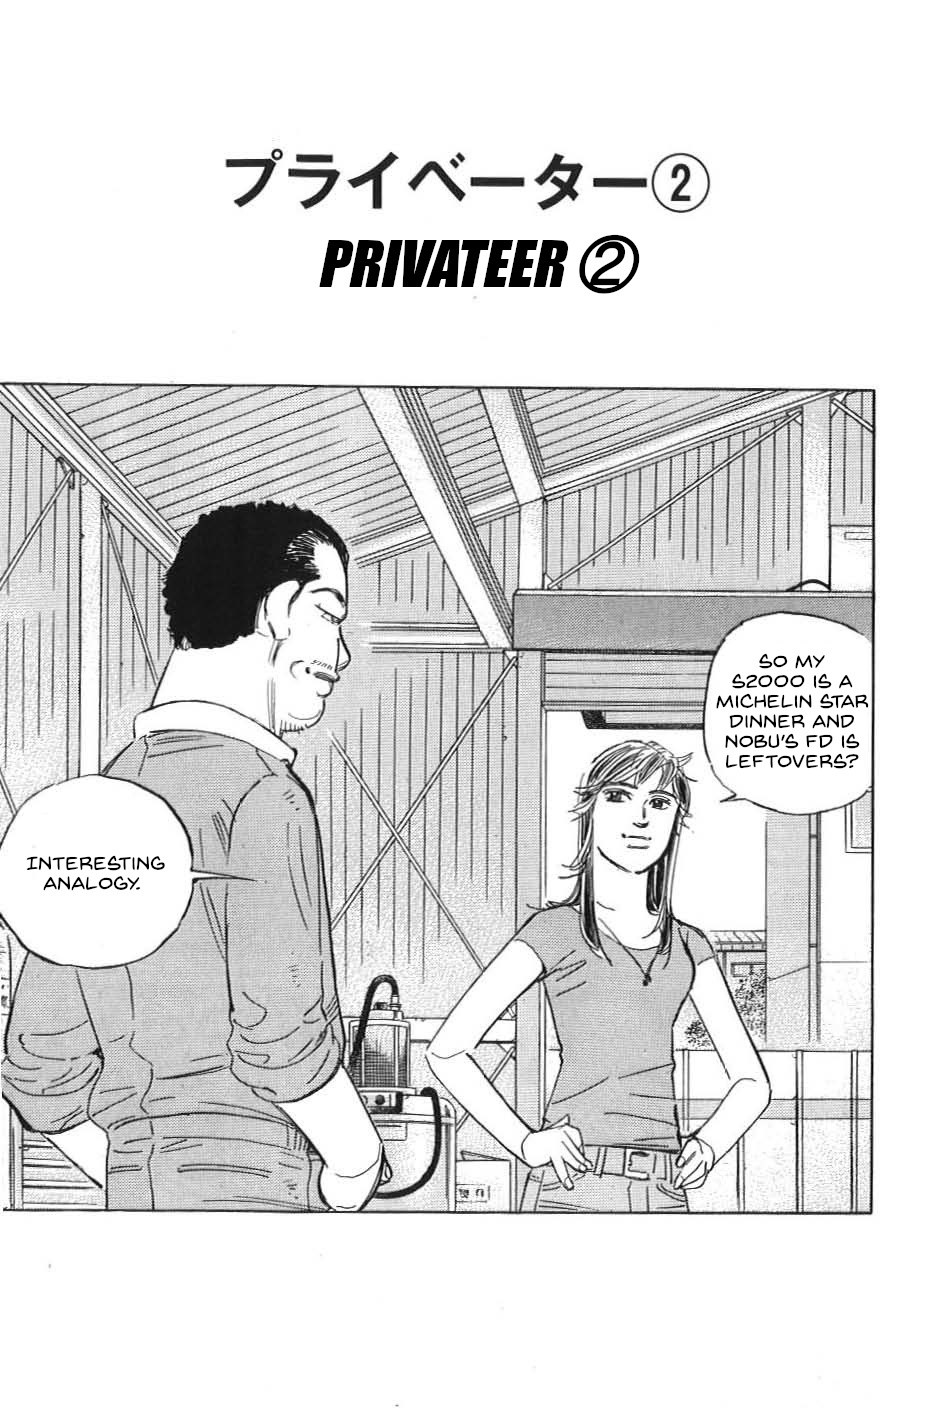 Wangan Midnight: C1 Runner Vol.2 Chapter 16: Privateer ② - Picture 1